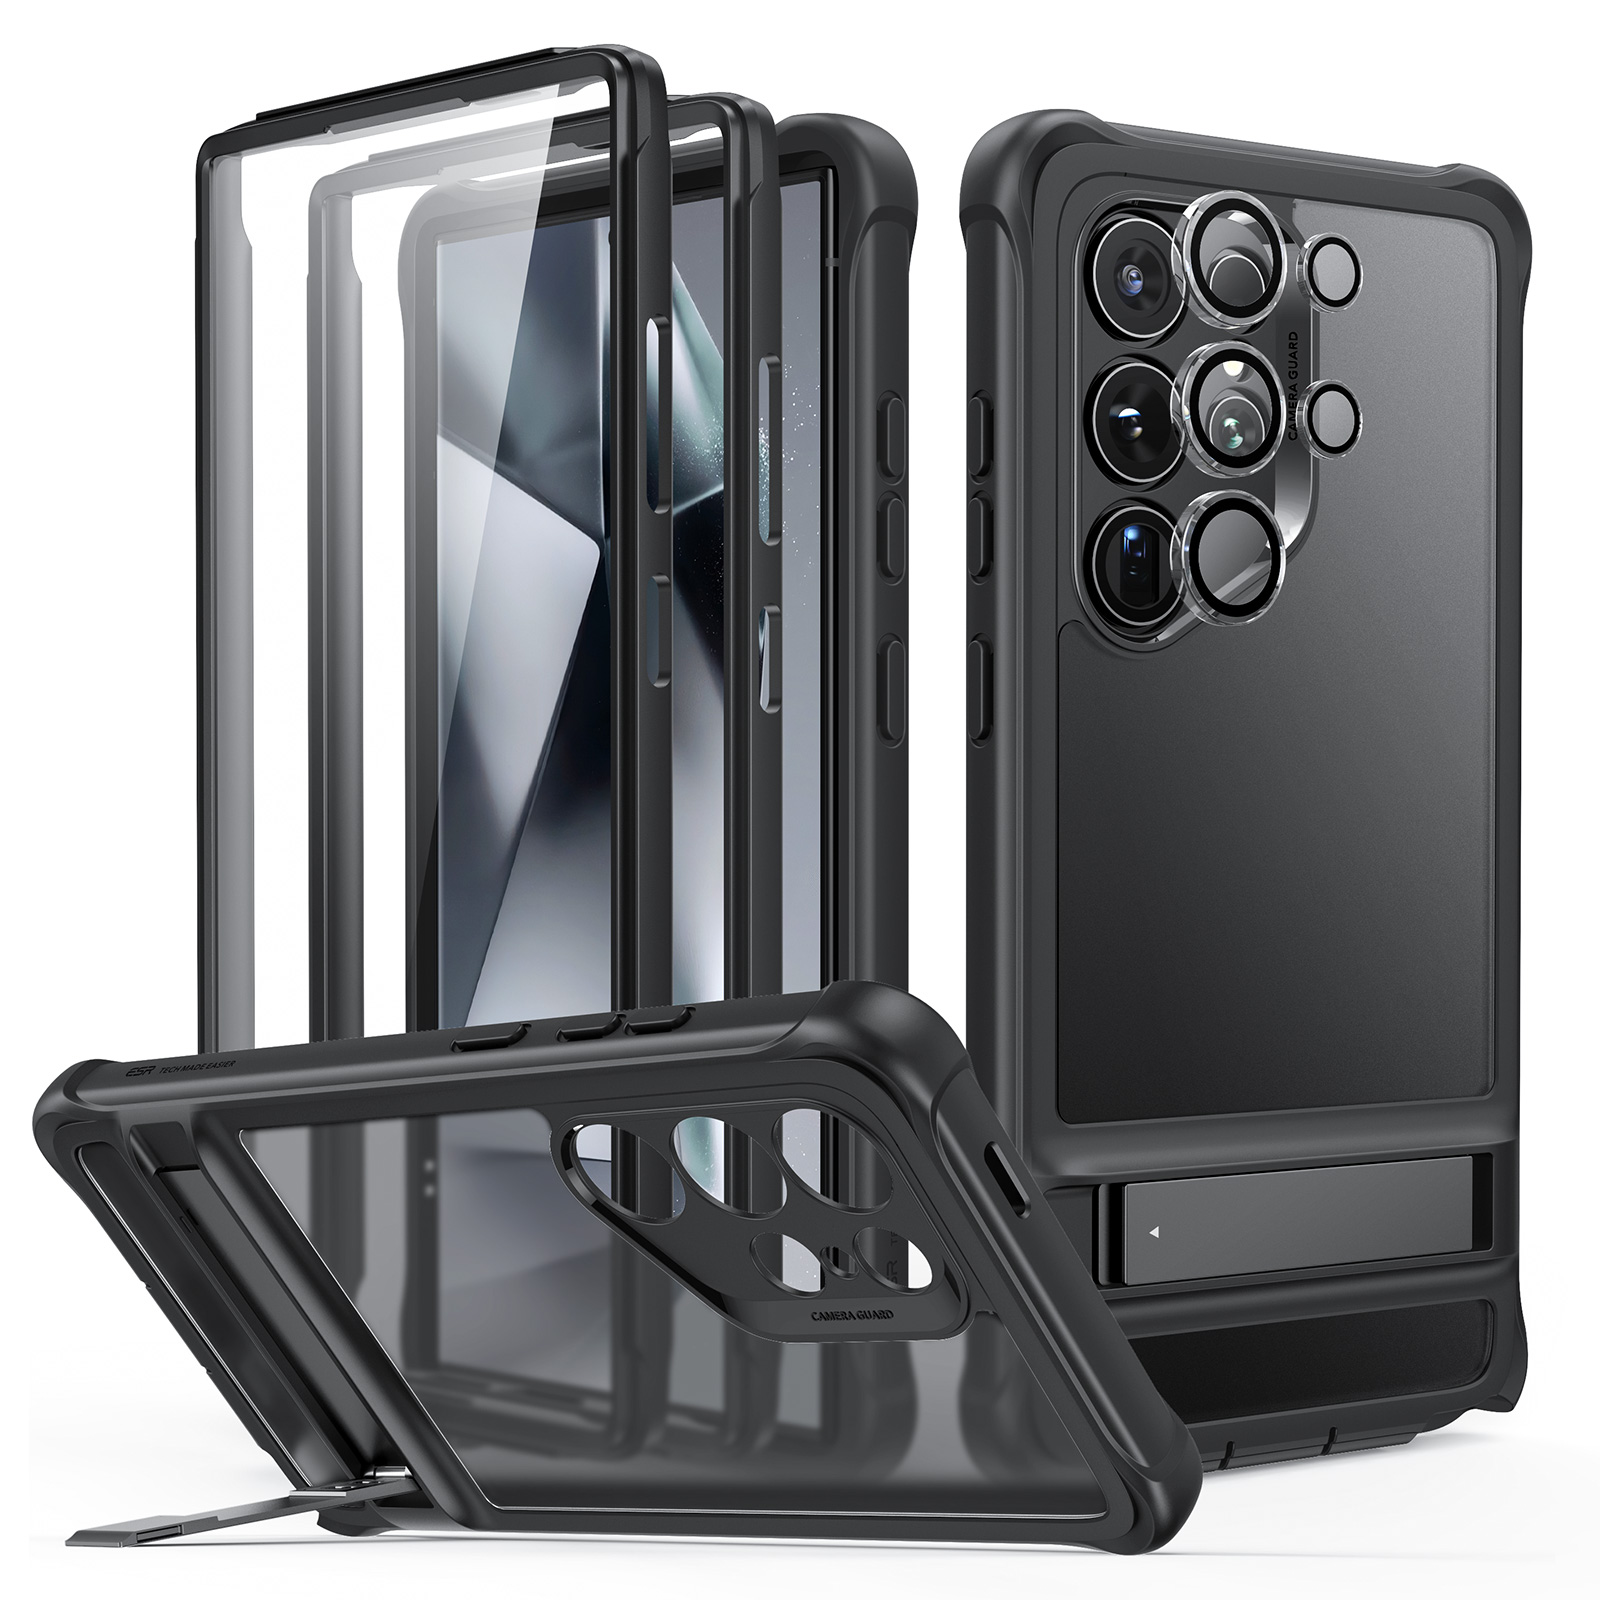 ESR for Samsung Galaxy S24 Ultra Case, S24 Ultra Case with Extra Protective Front Frame & 3 Kickstand Modes, Exceeds Full-Coverage Military-Grade